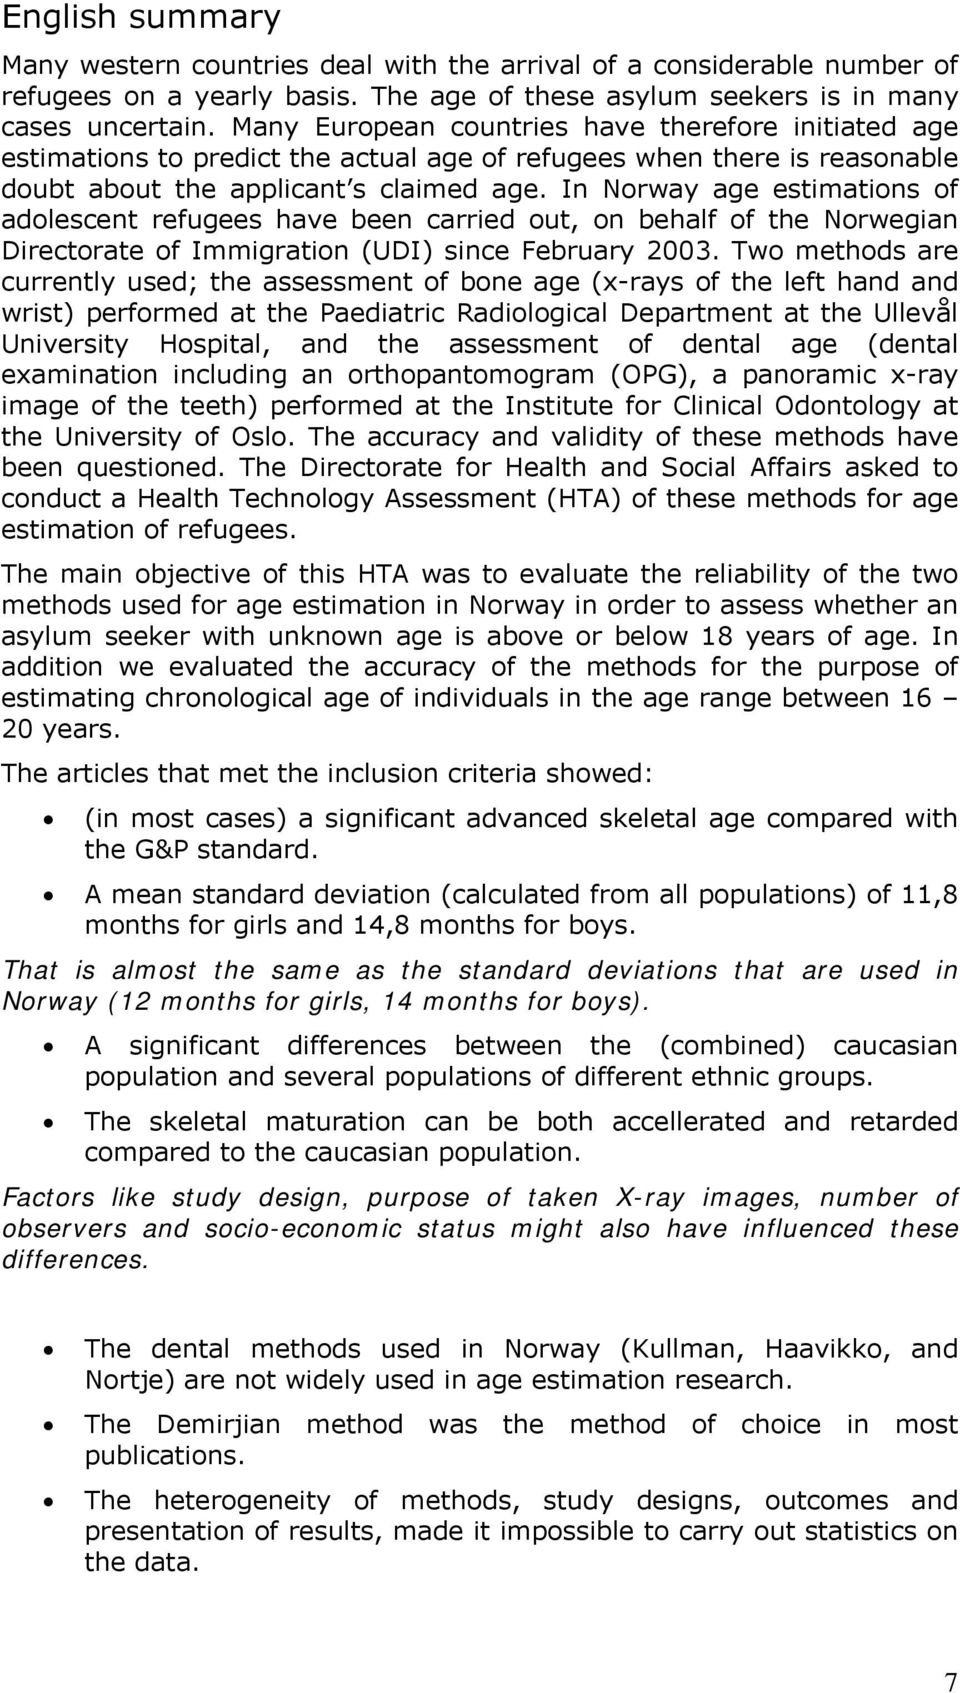 In Norway age estimations of adolescent refugees have been carried out, on behalf of the Norwegian Directorate of Immigration (UDI) since February 2003.